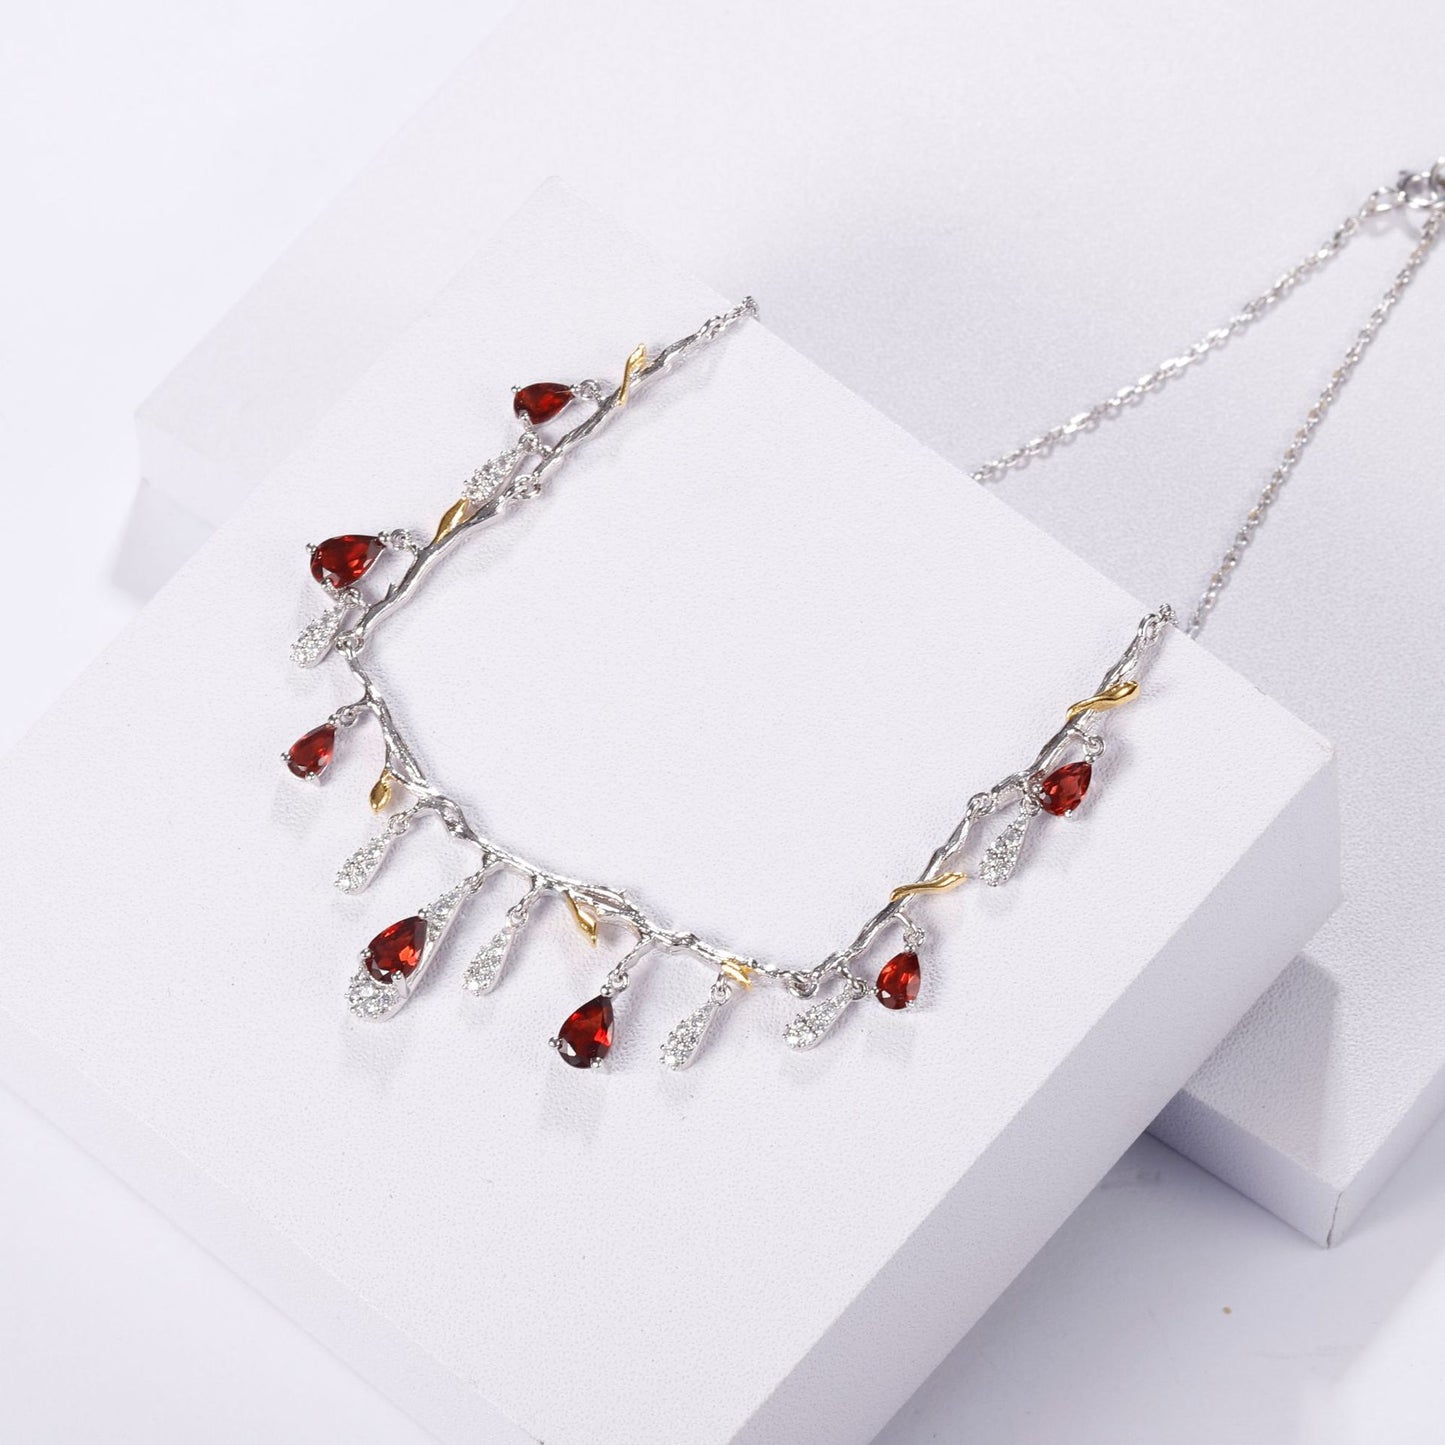 High-end Style Inlaid Natural Colourful Gemstone Flower Branch Design Silver Necklace for Women